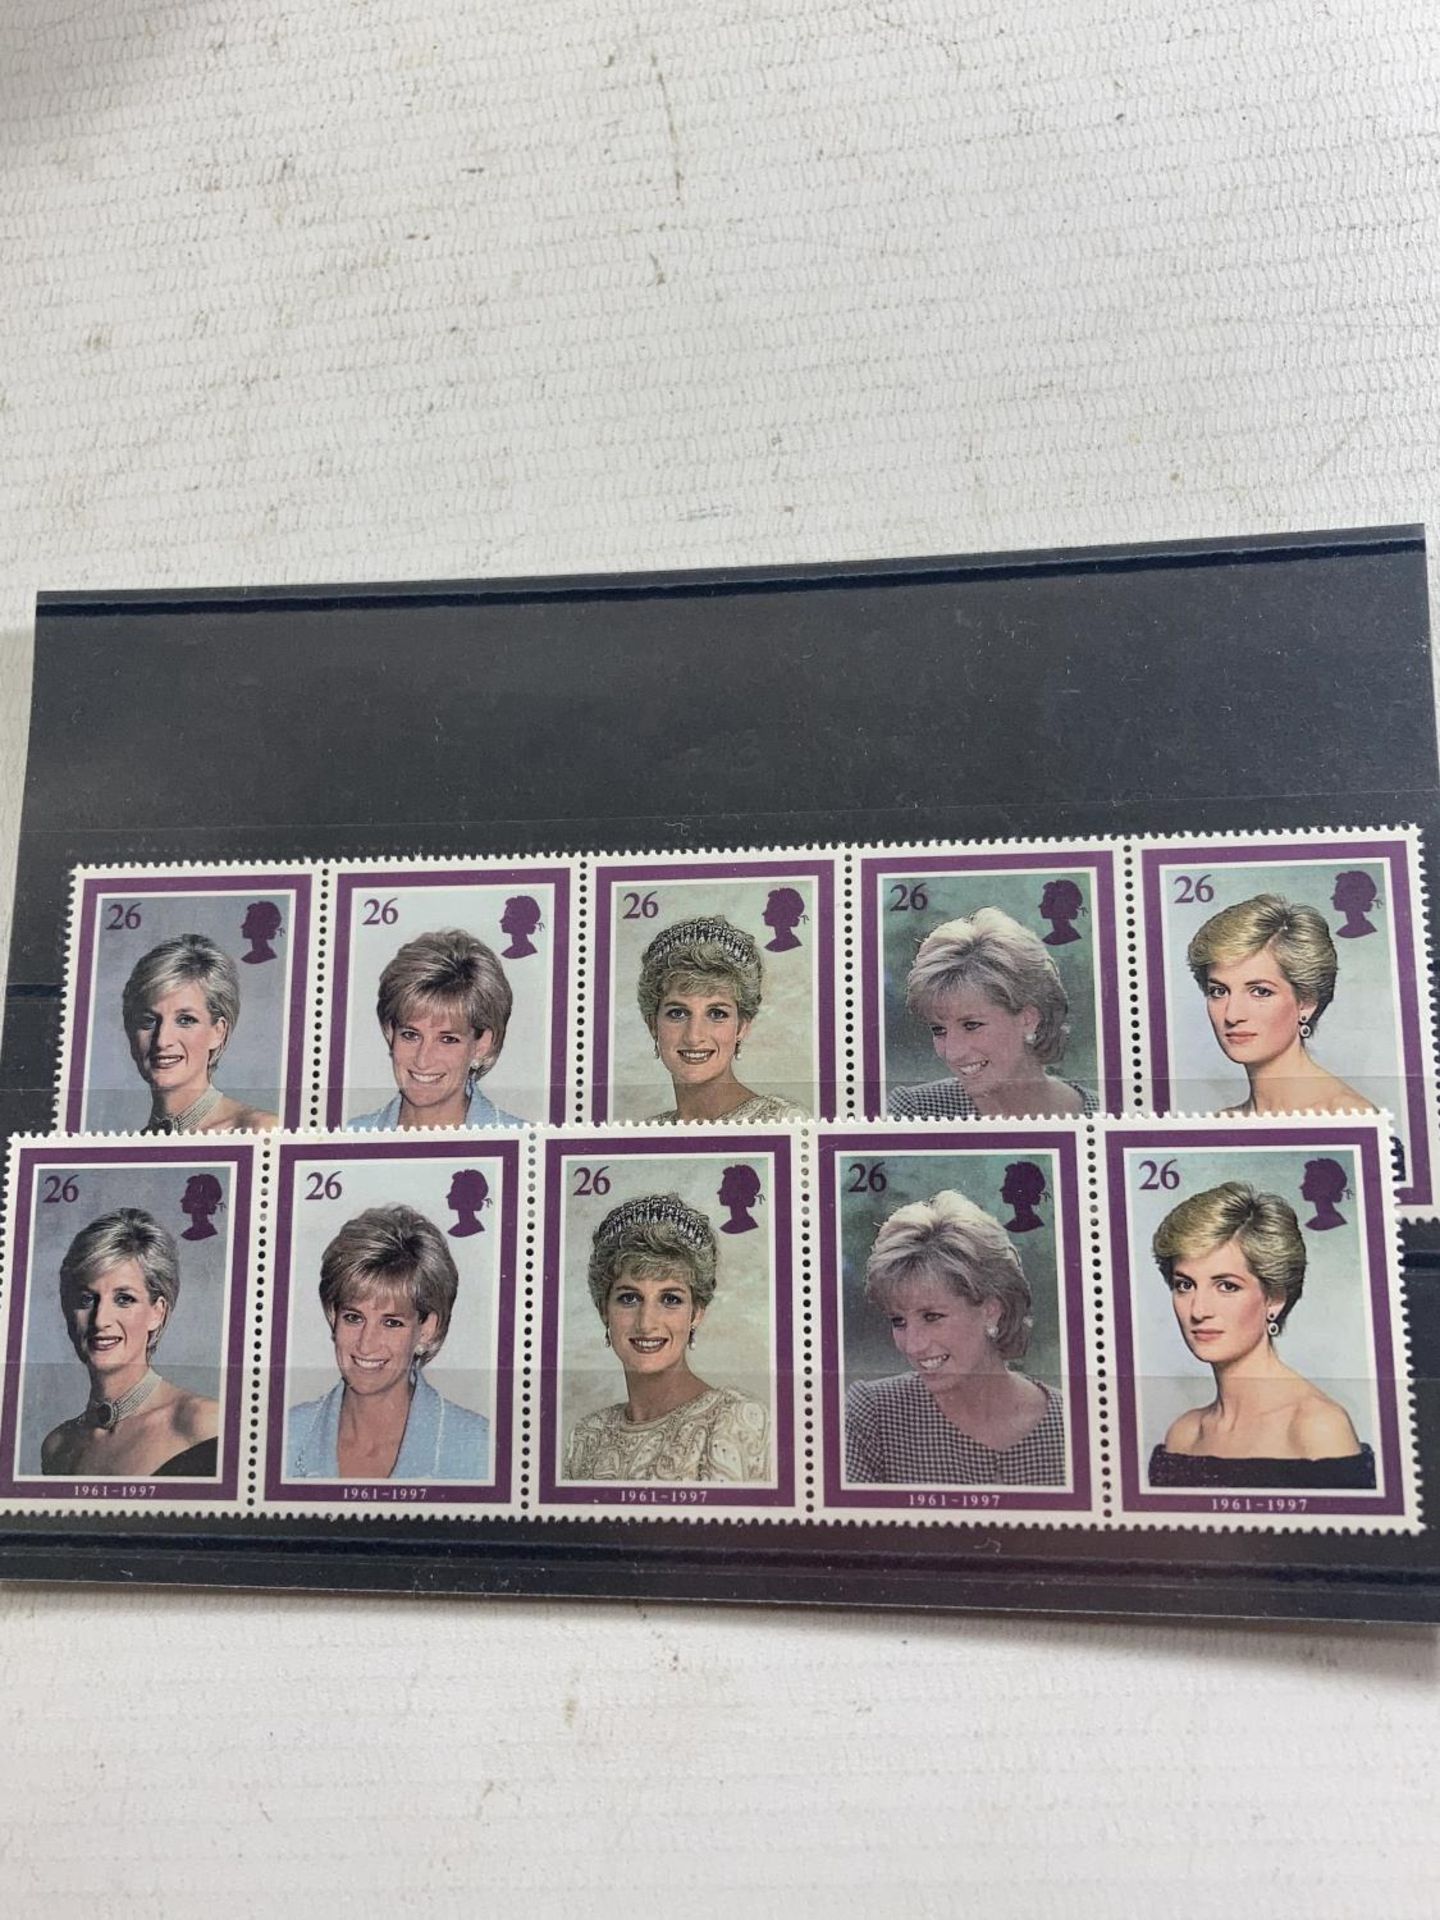 TWO NH MINT STRIPS OF GREAT BRITAIN PRINCESS OF WALES STAMPS TOGETHER WITH A CASED PRINCESS DIANA - Image 2 of 6